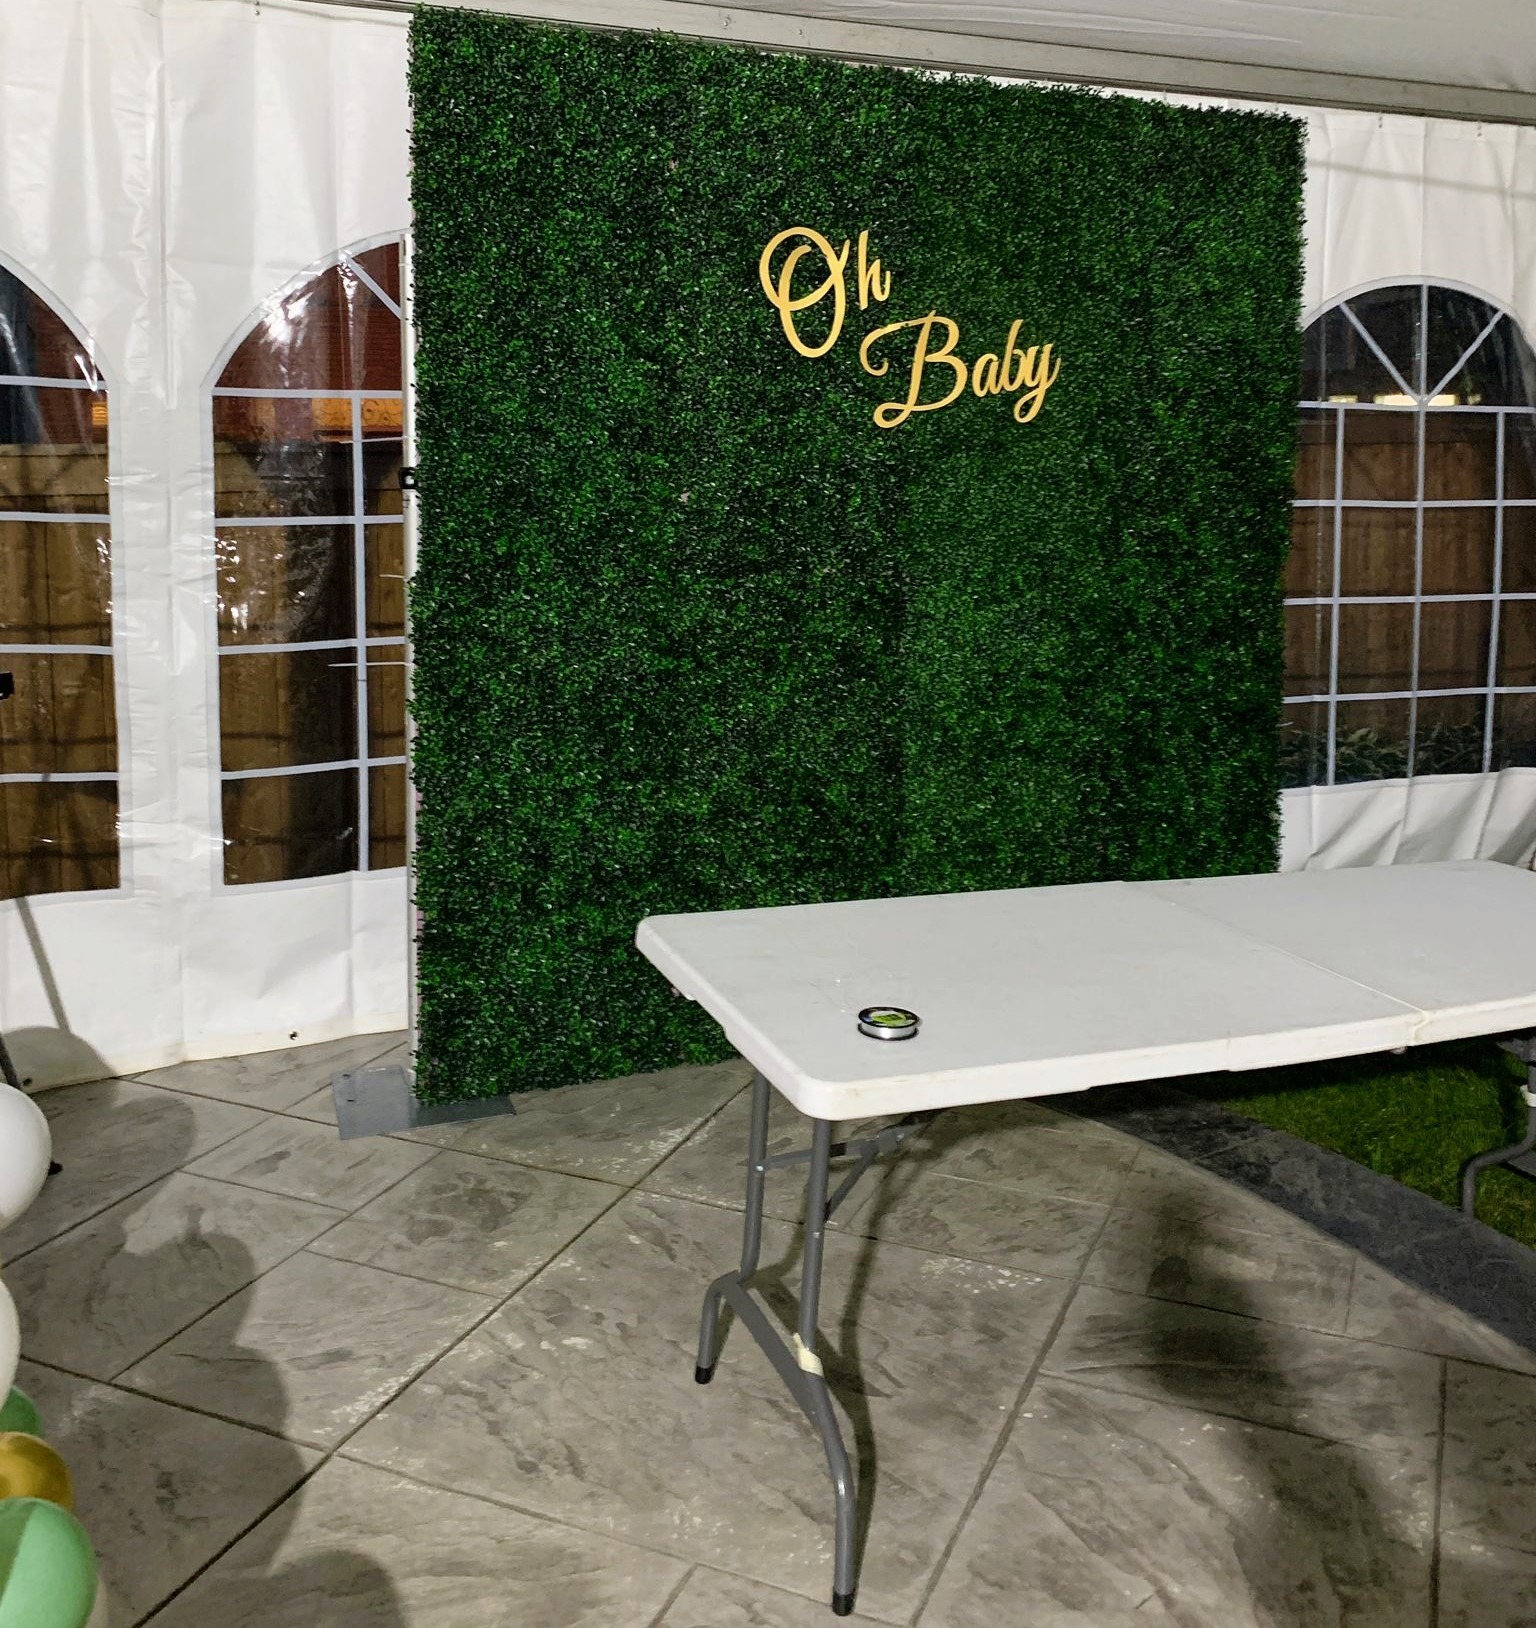 Aurora Green Grass Backdrop Rental for Baby Showers